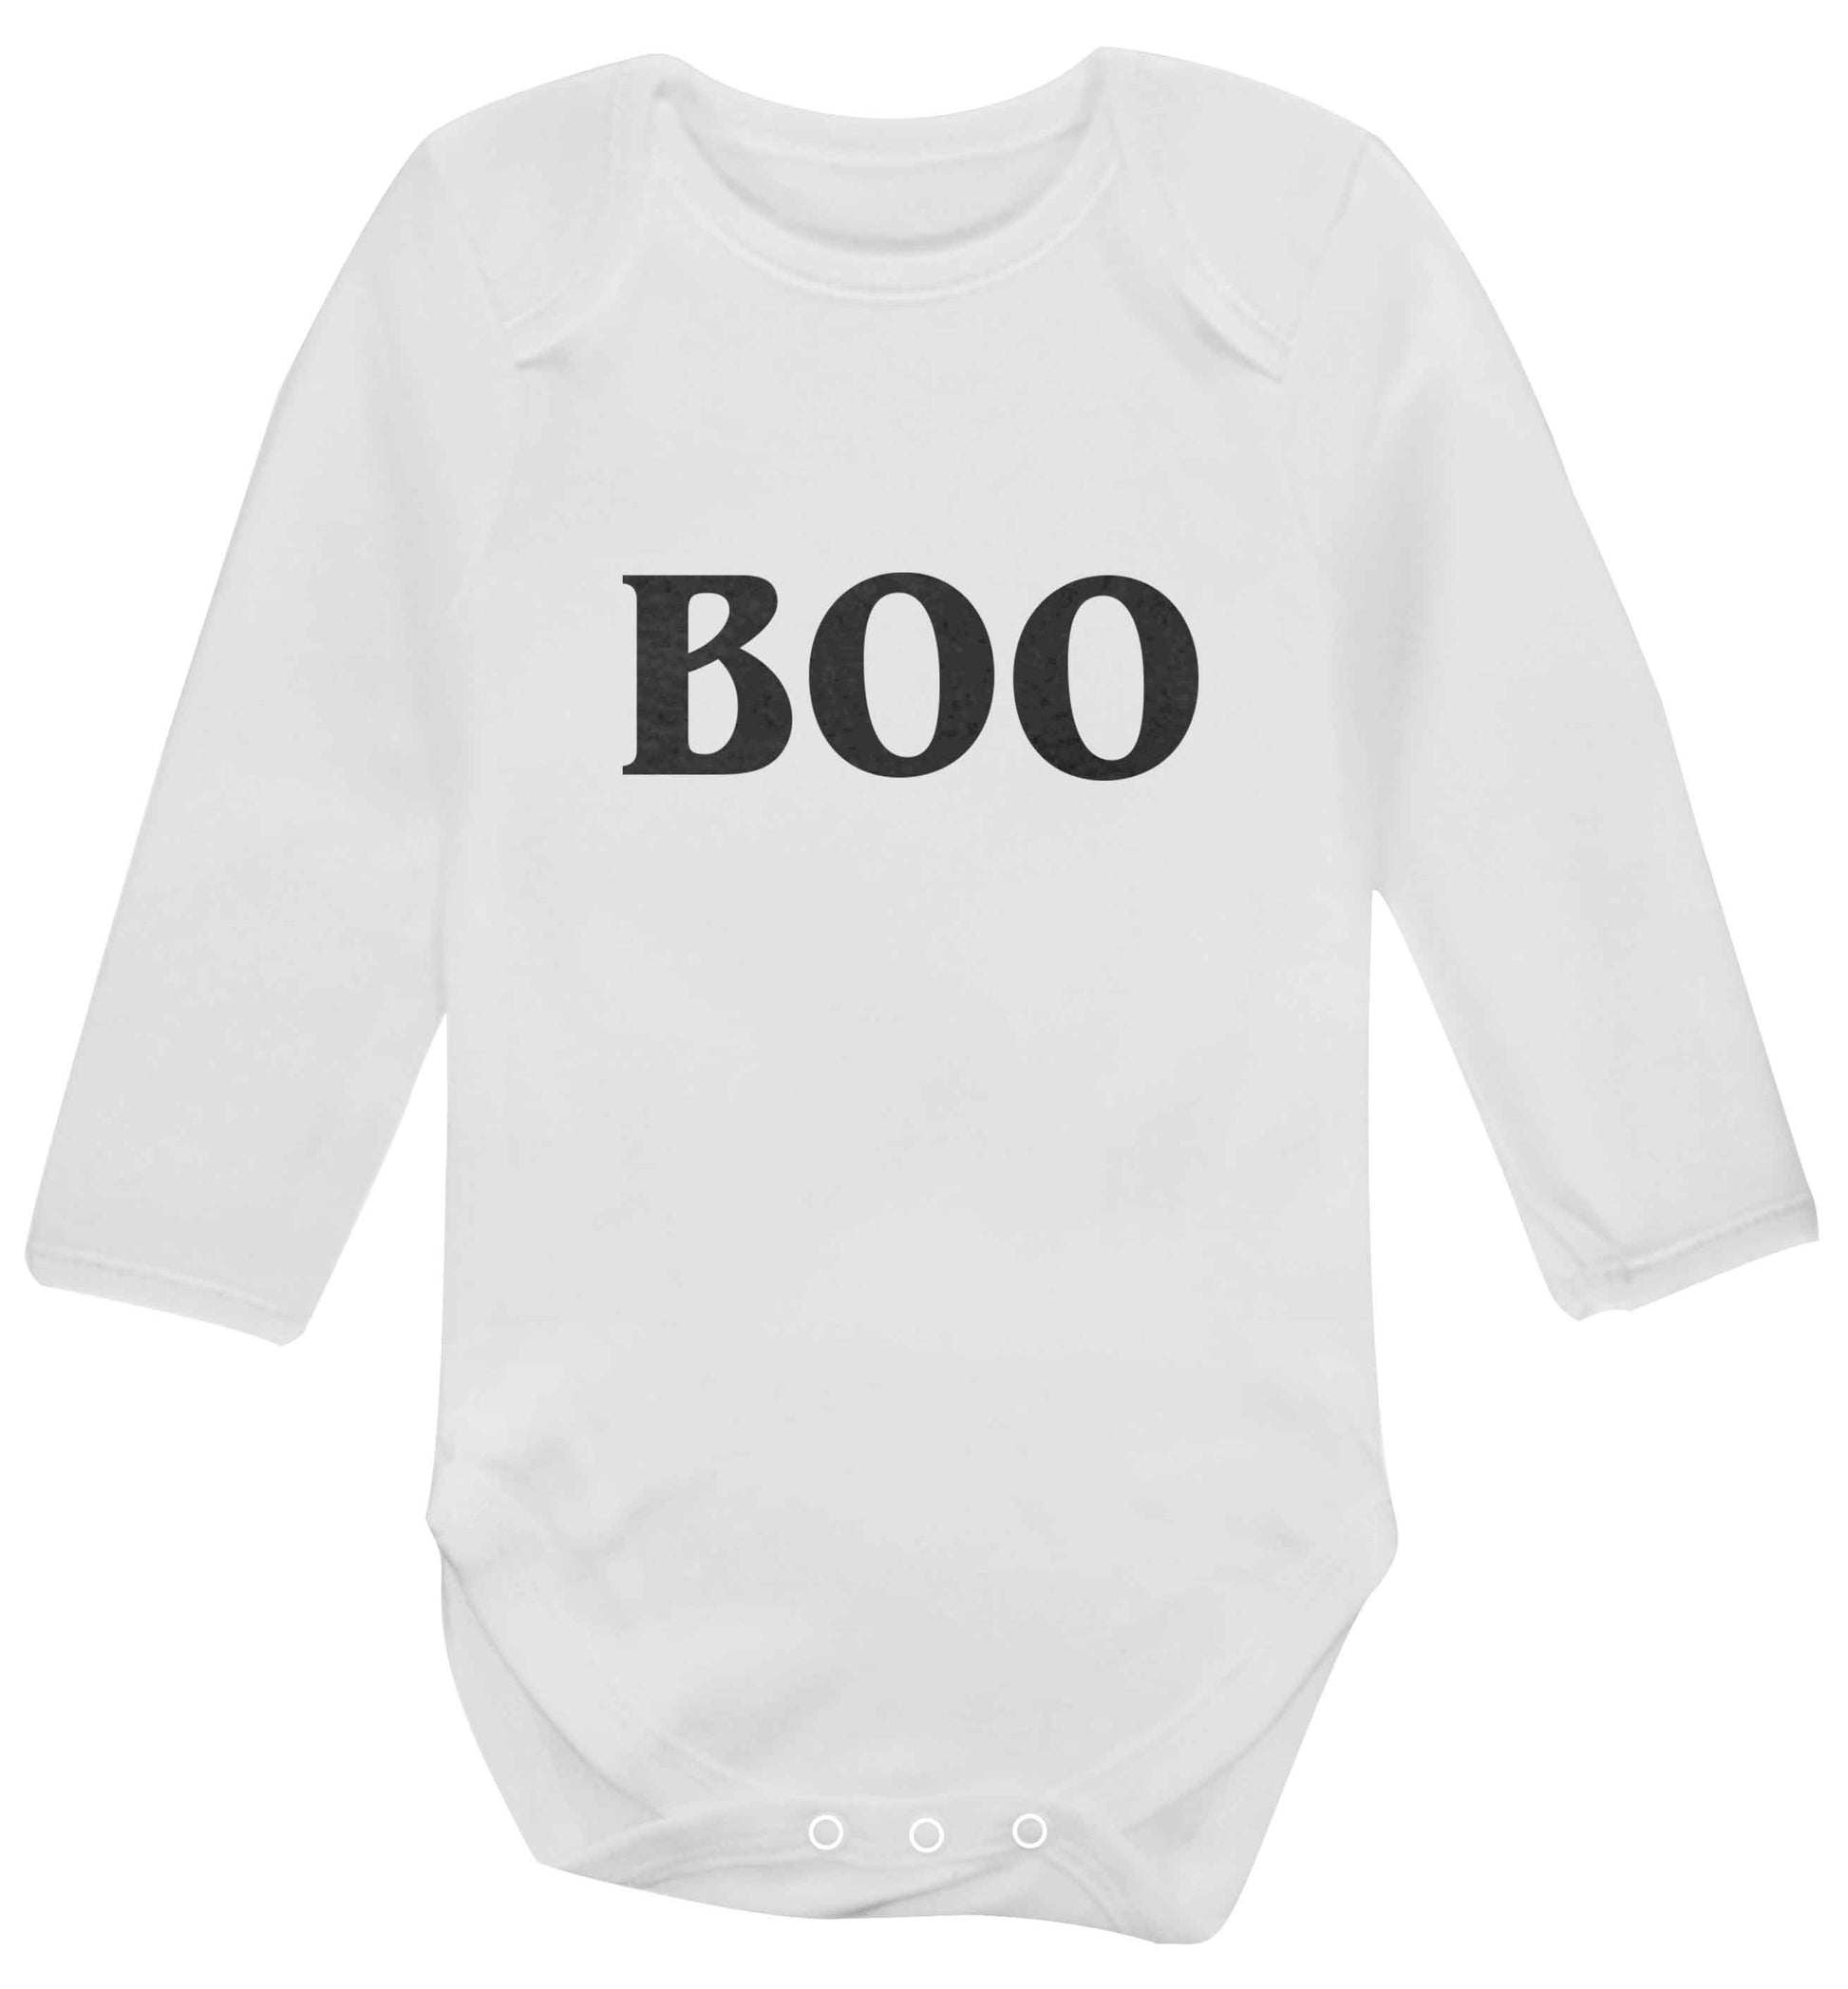 Boo baby vest long sleeved white 6-12 months